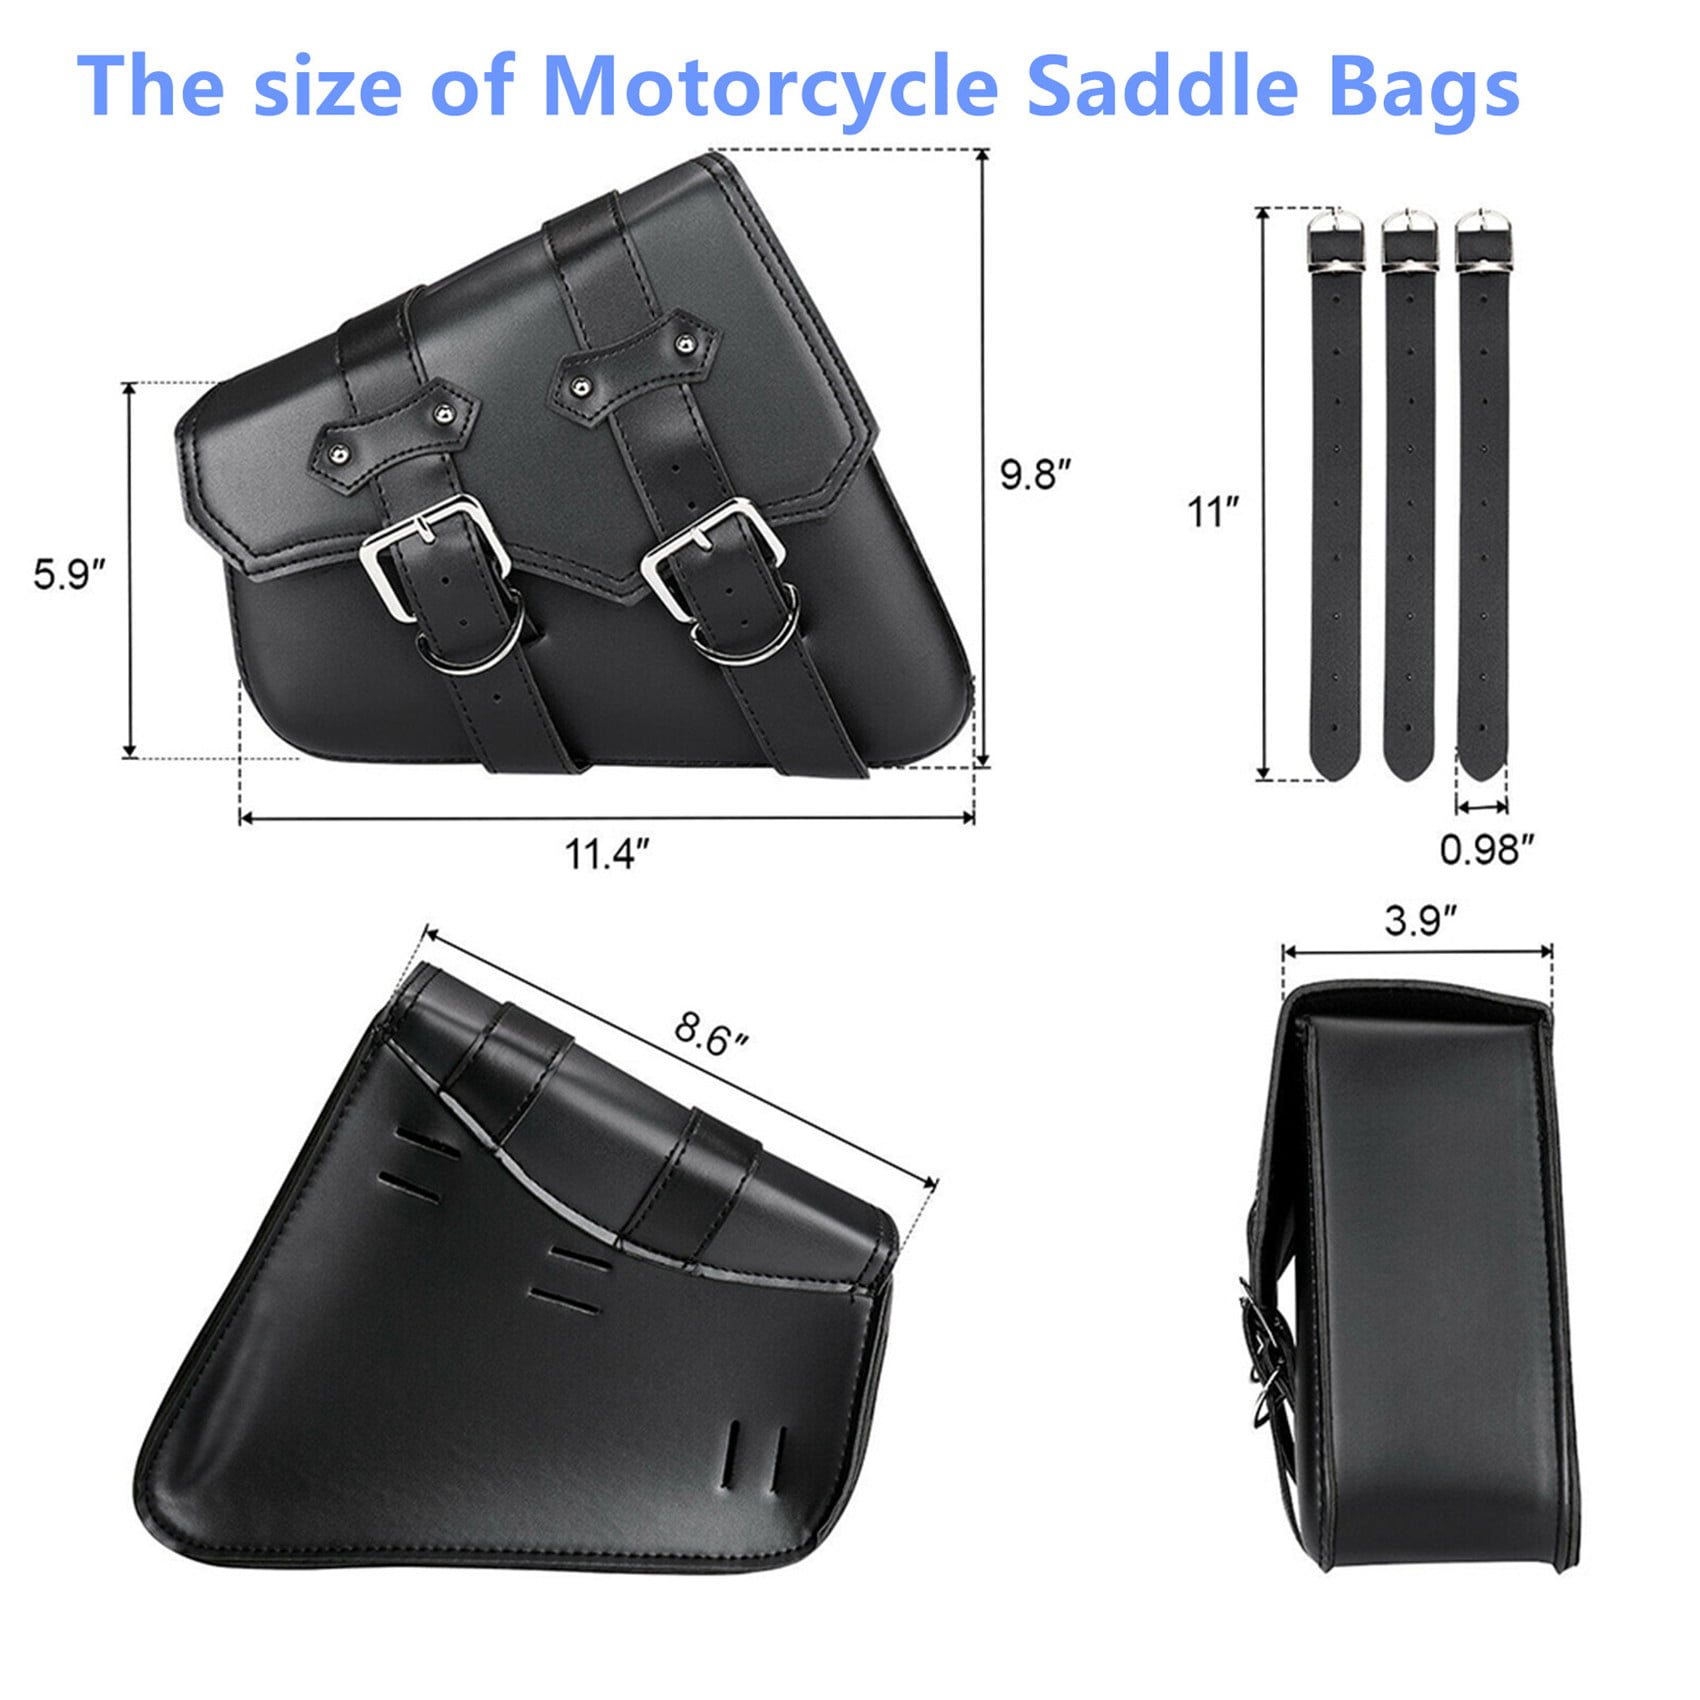 KEMIMOTO Motorcycle Travel Luggage Bag, Motorcycle Tail Bag for Softail  Sportster Dyna Touring Models Road King Road Glide Street Glide Waterproof  All